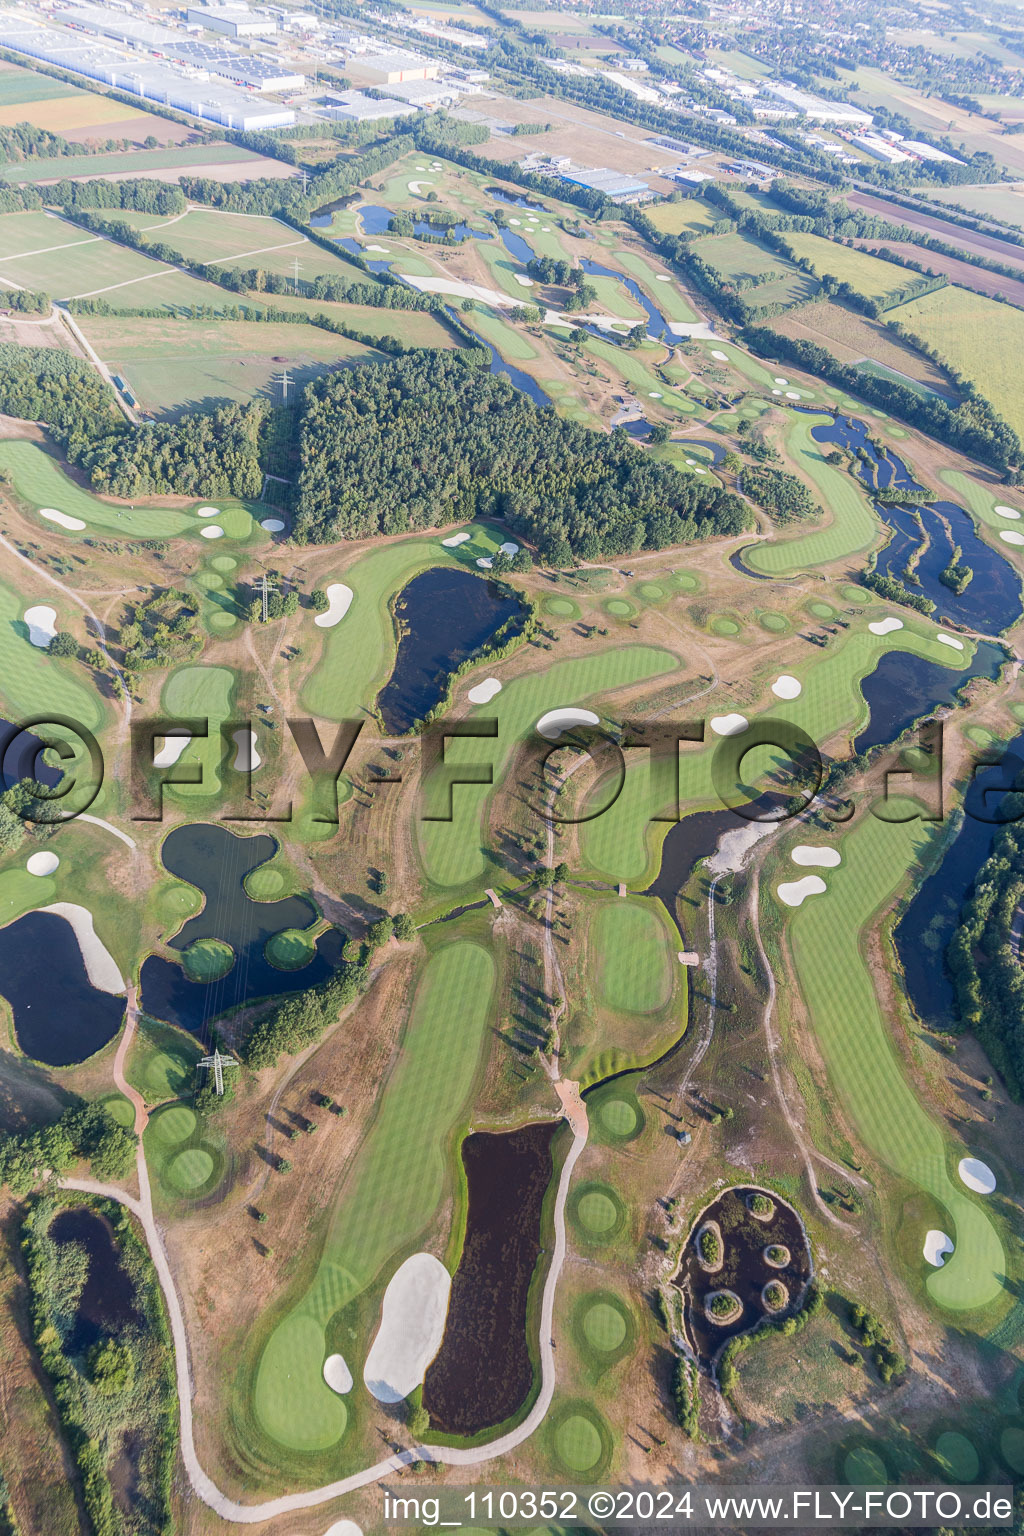 Grounds of the Golf course at Green Eagle Golf Courses in Winsen (Luhe) in the state Lower Saxony, Germany from the plane